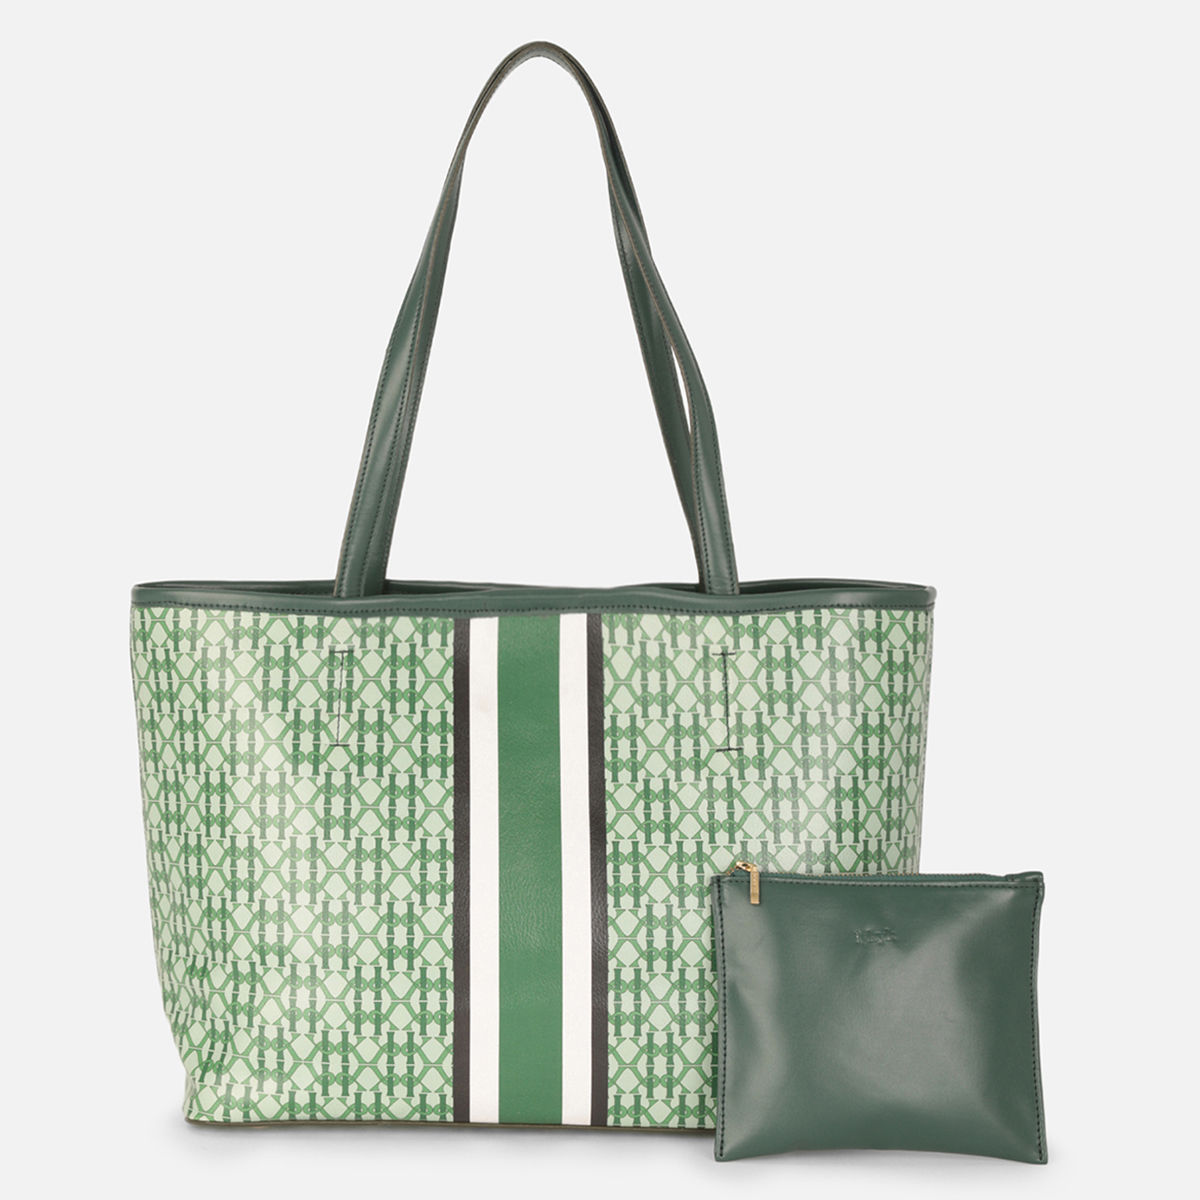 Alexis Green and White Stripped Monogram Design Tote Bag With Pouch